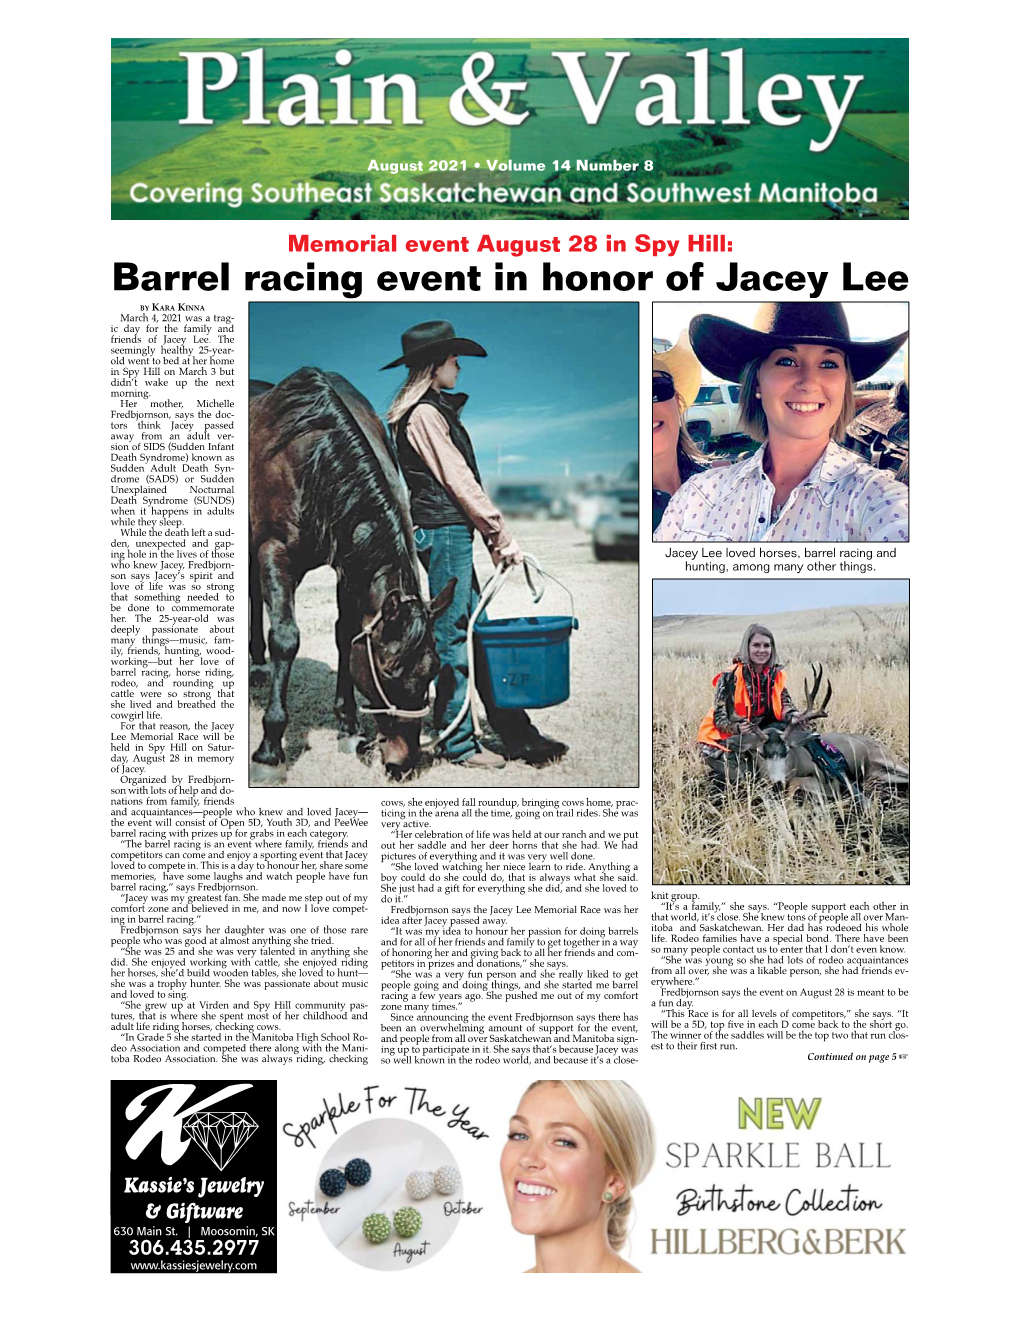 Barrel Racing Event in Honor of Jacey Lee by KARA KINNA March 4, 2021 Was a Trag- Ic Day for the Family and Friends of Jacey Lee